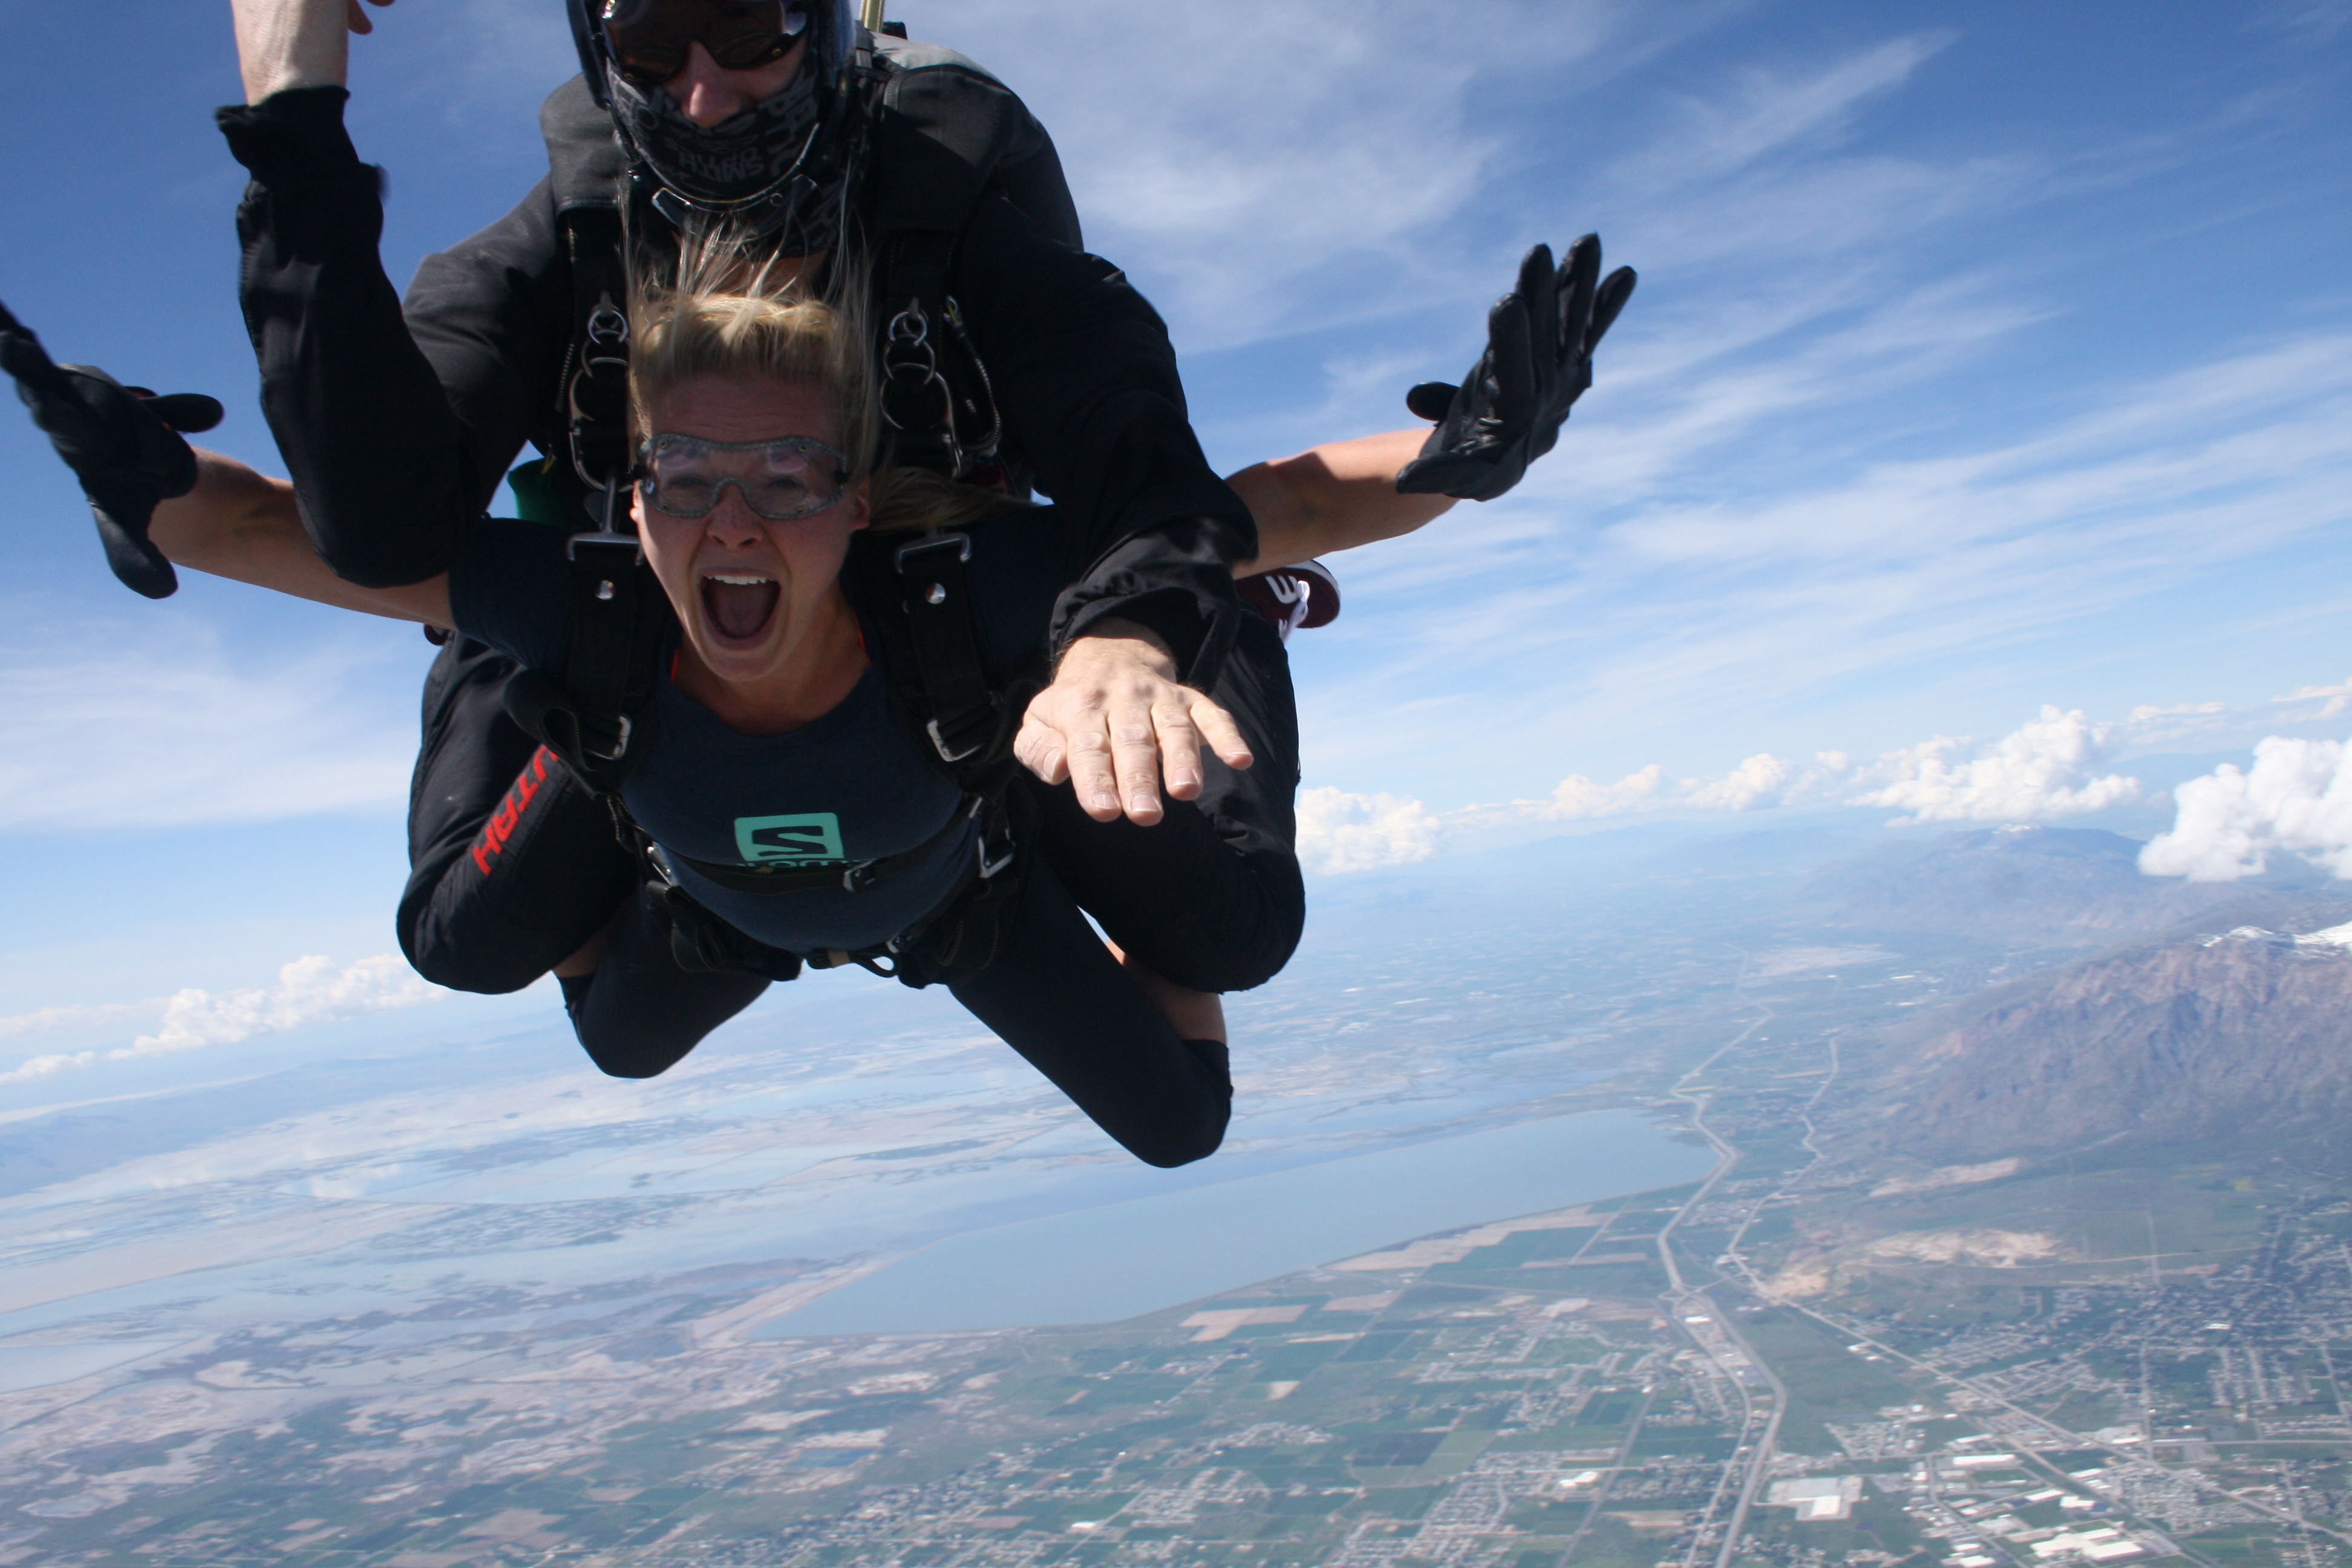 Skydiving photos get their own post